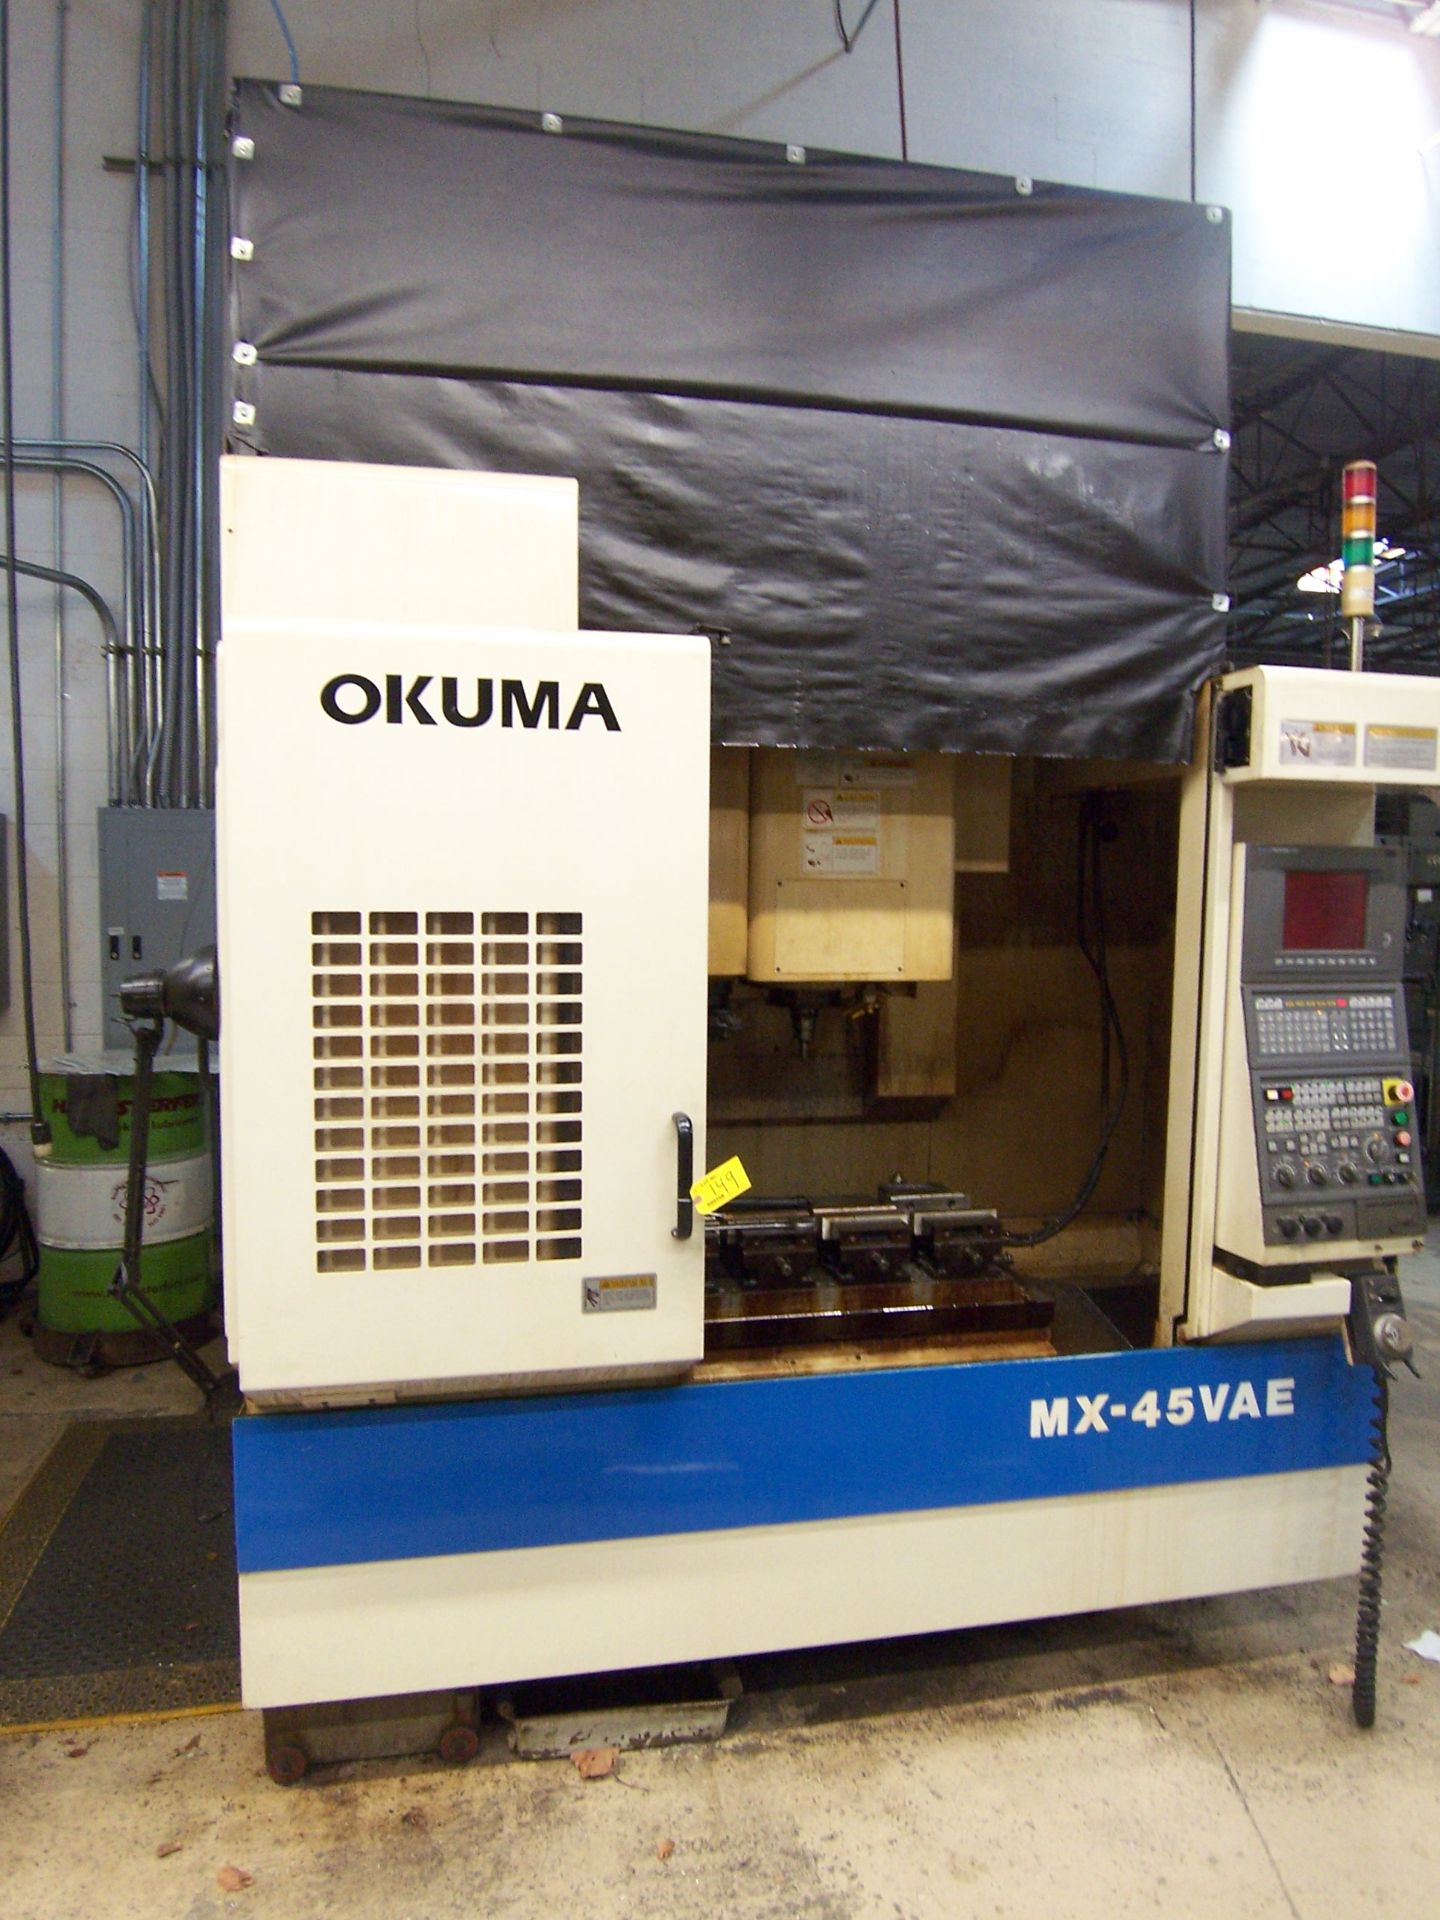 OKUMA MDL. MX-45VAE VERTICAL MACHINING CENTER WITH 18.11" X 39-1/2" TABLE, TRAVELS: X-30, Y-18. - Image 3 of 9